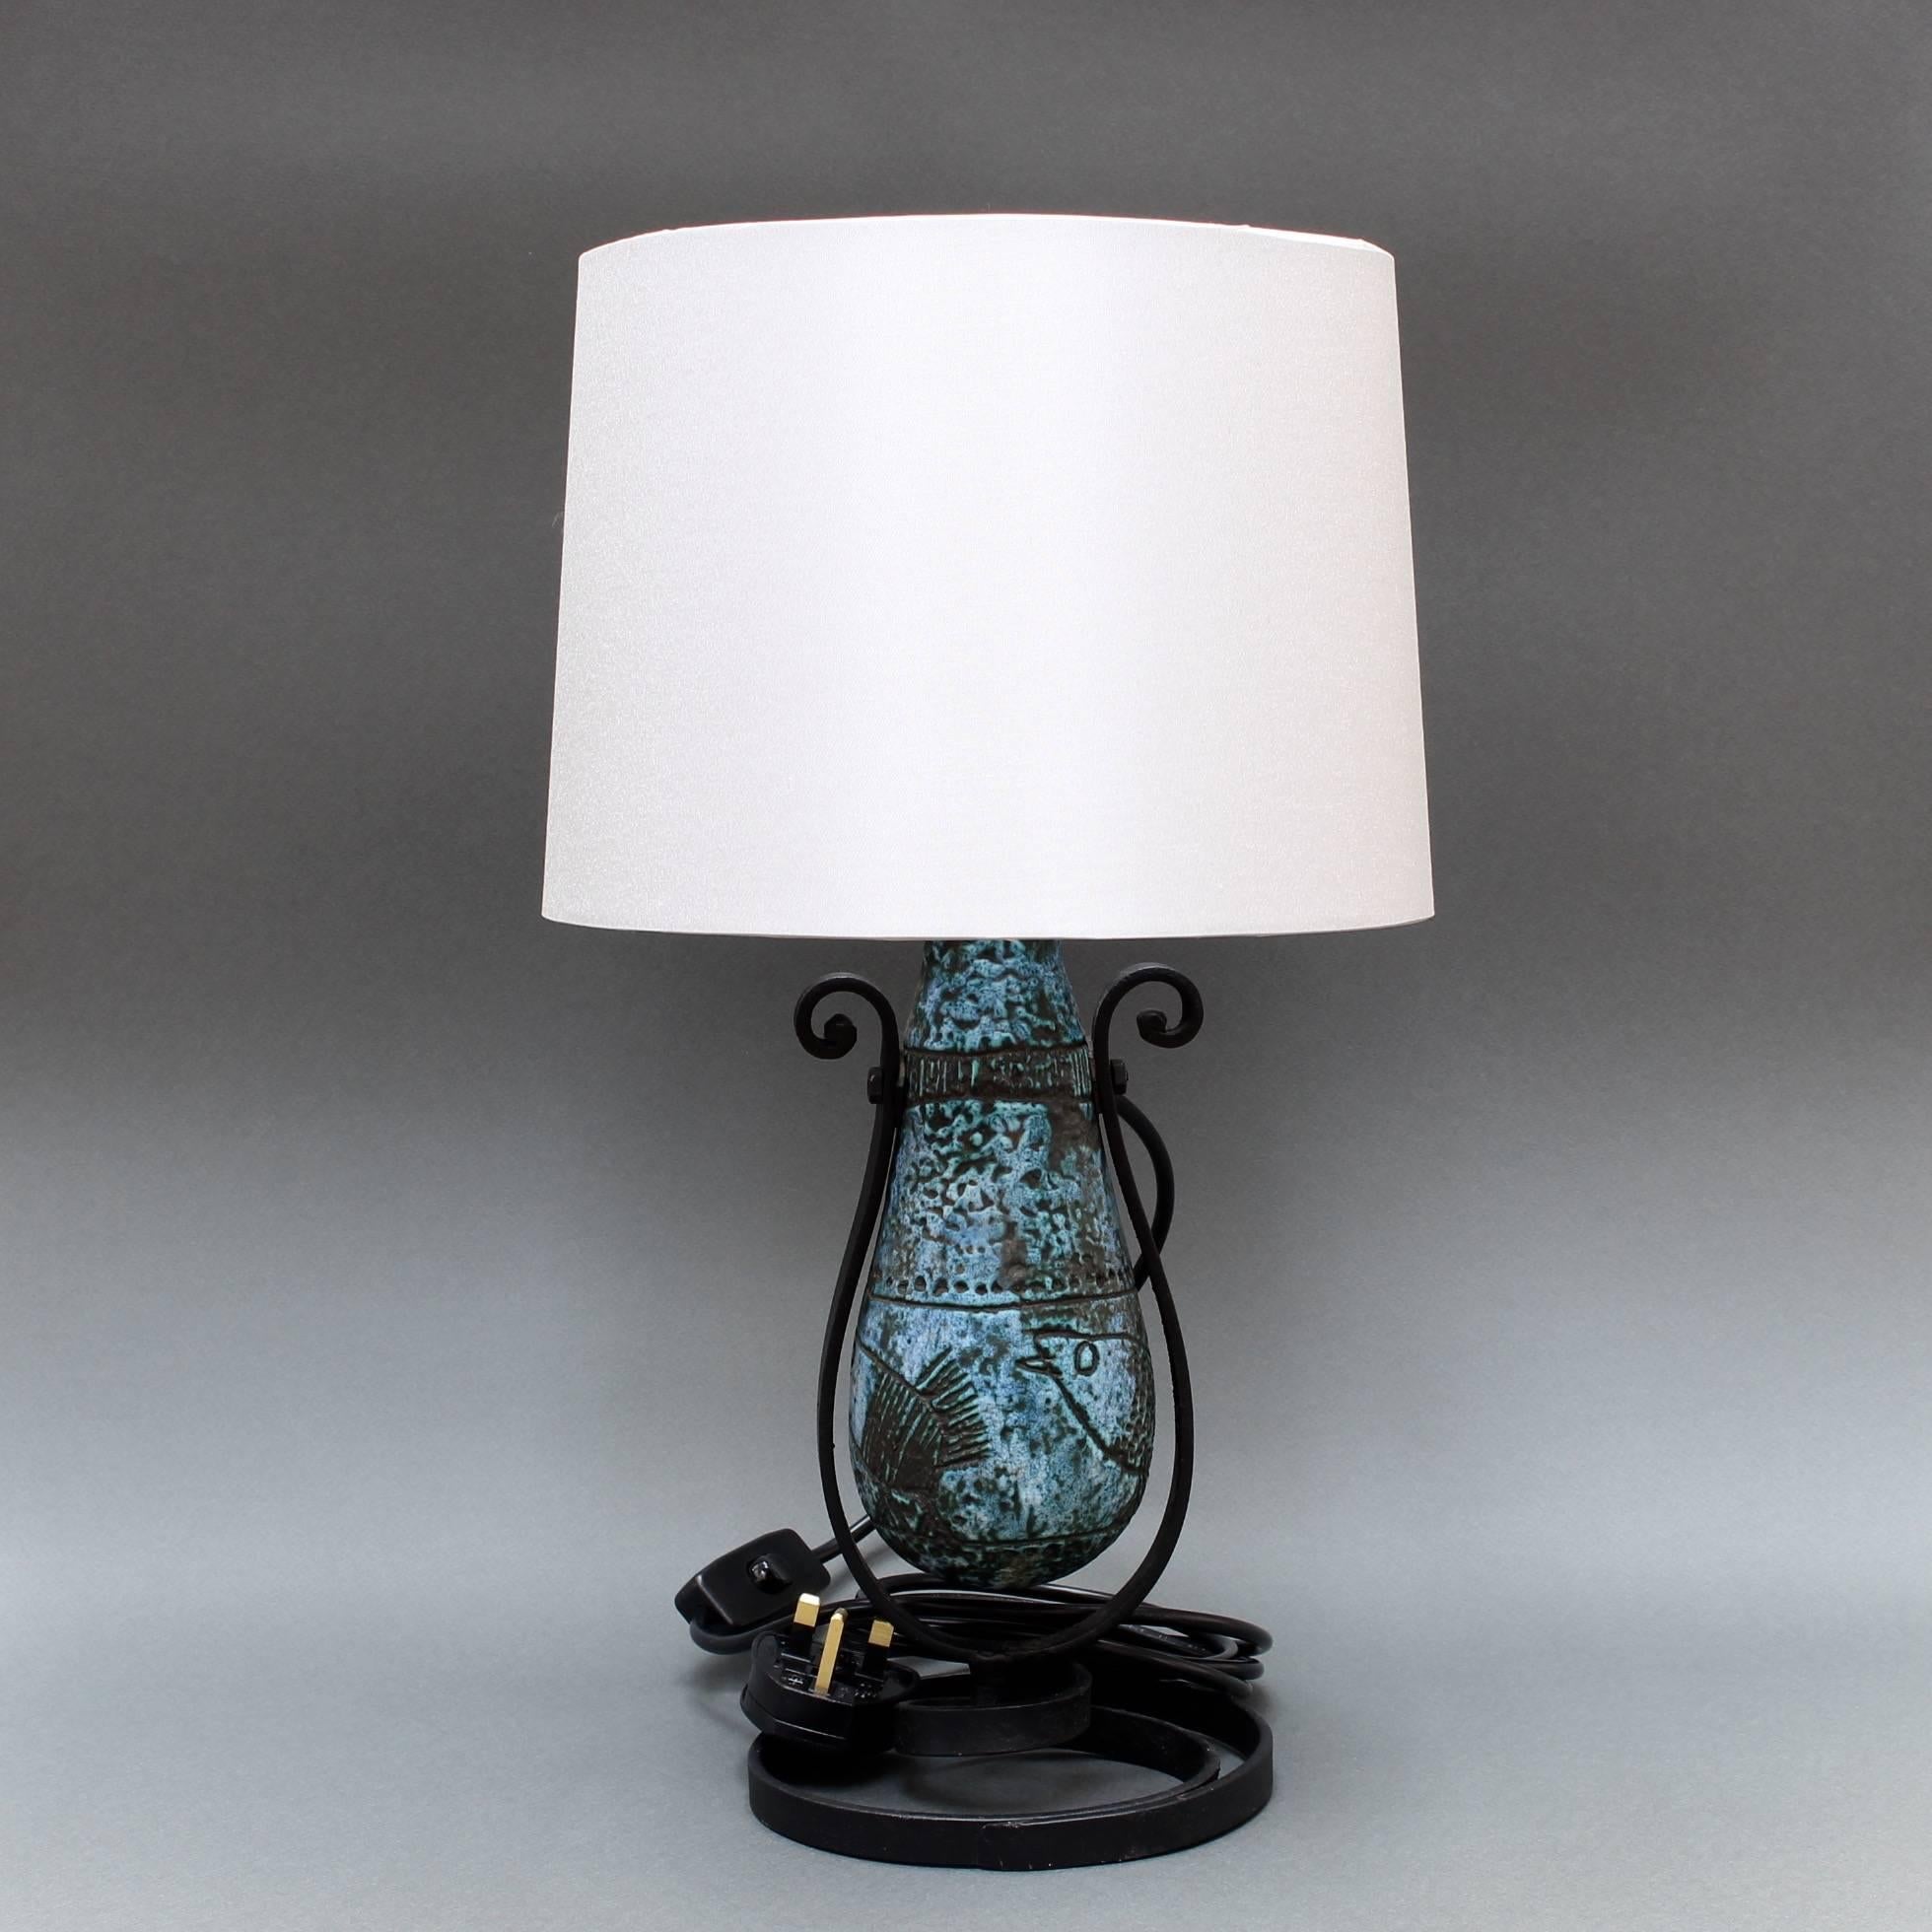 Blue ceramic pivoting table lamp (circa 1950s) by Jacques Blin (1920-1995). This lamp has Blin's signature blue cloudy glaze featuring etchings of fanciful images of birds walking the grounds. The lamp pivots on the wrought-iron base. It is in